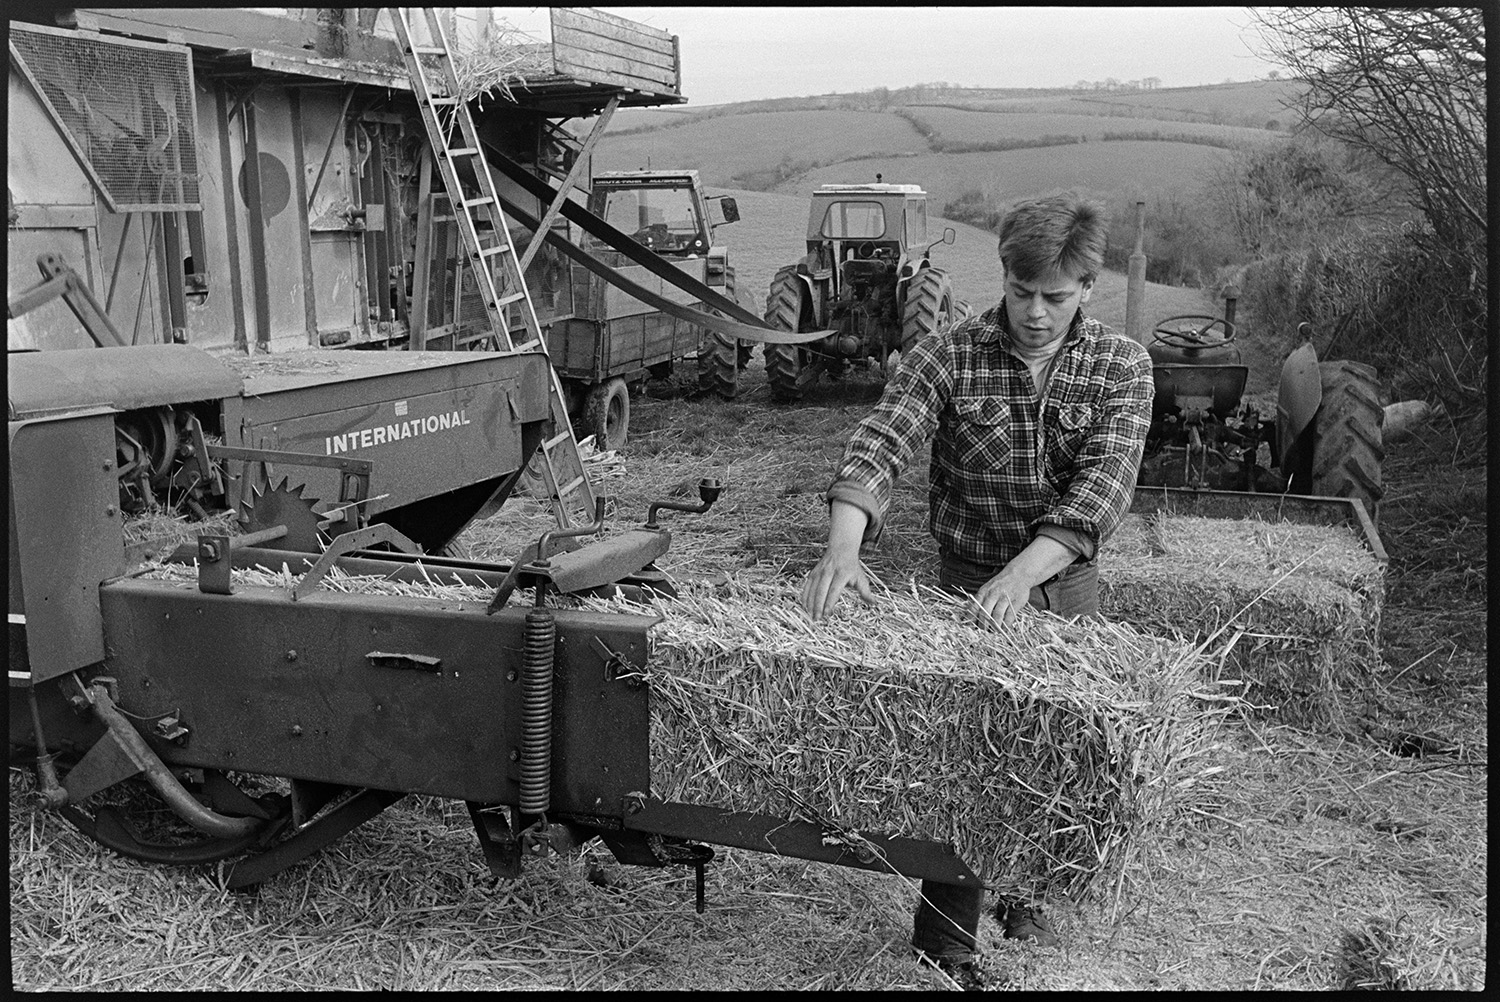 Reedcombing, feeding machine from Dutch barn. 
[Brian Down lifting a straw bale out of a baler in a field at Spittle Farm, Chulmleigh. A tractor and link box with other straw bales can be seen in the background.]